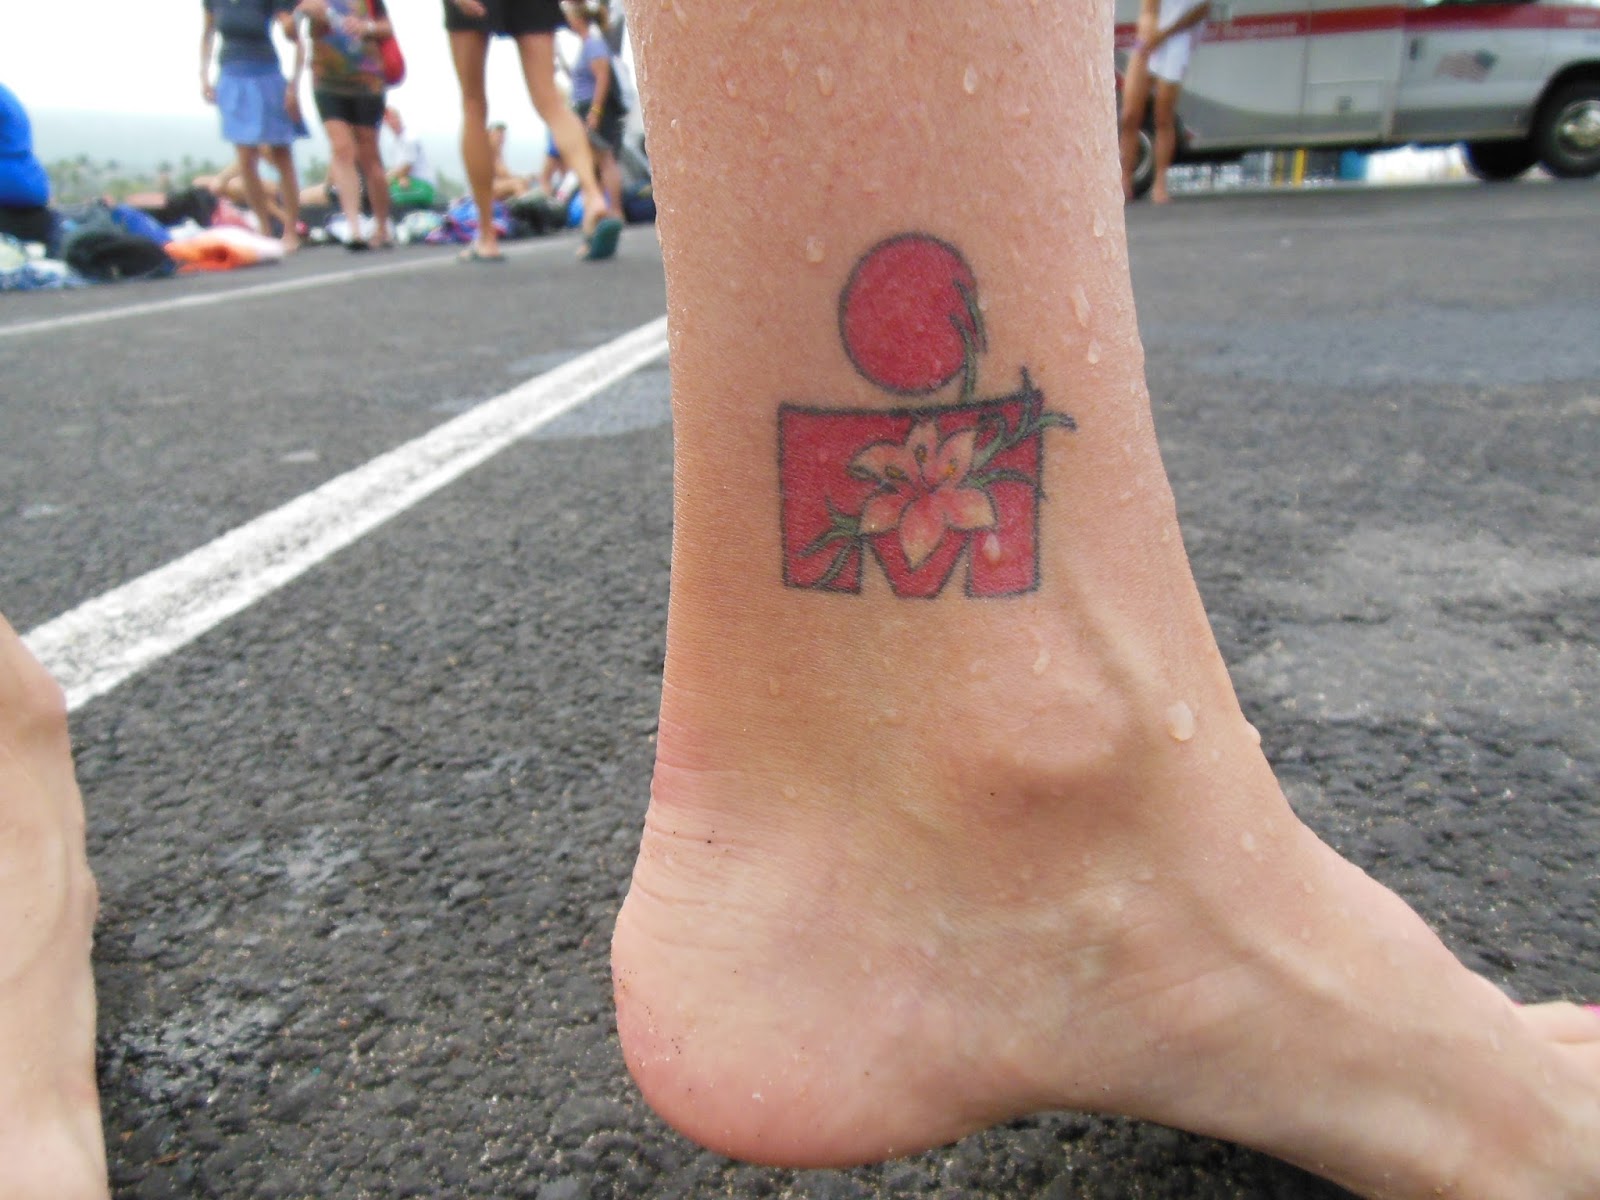 John Post, MD: Thinking About an Ironman Tattoo? This May Help